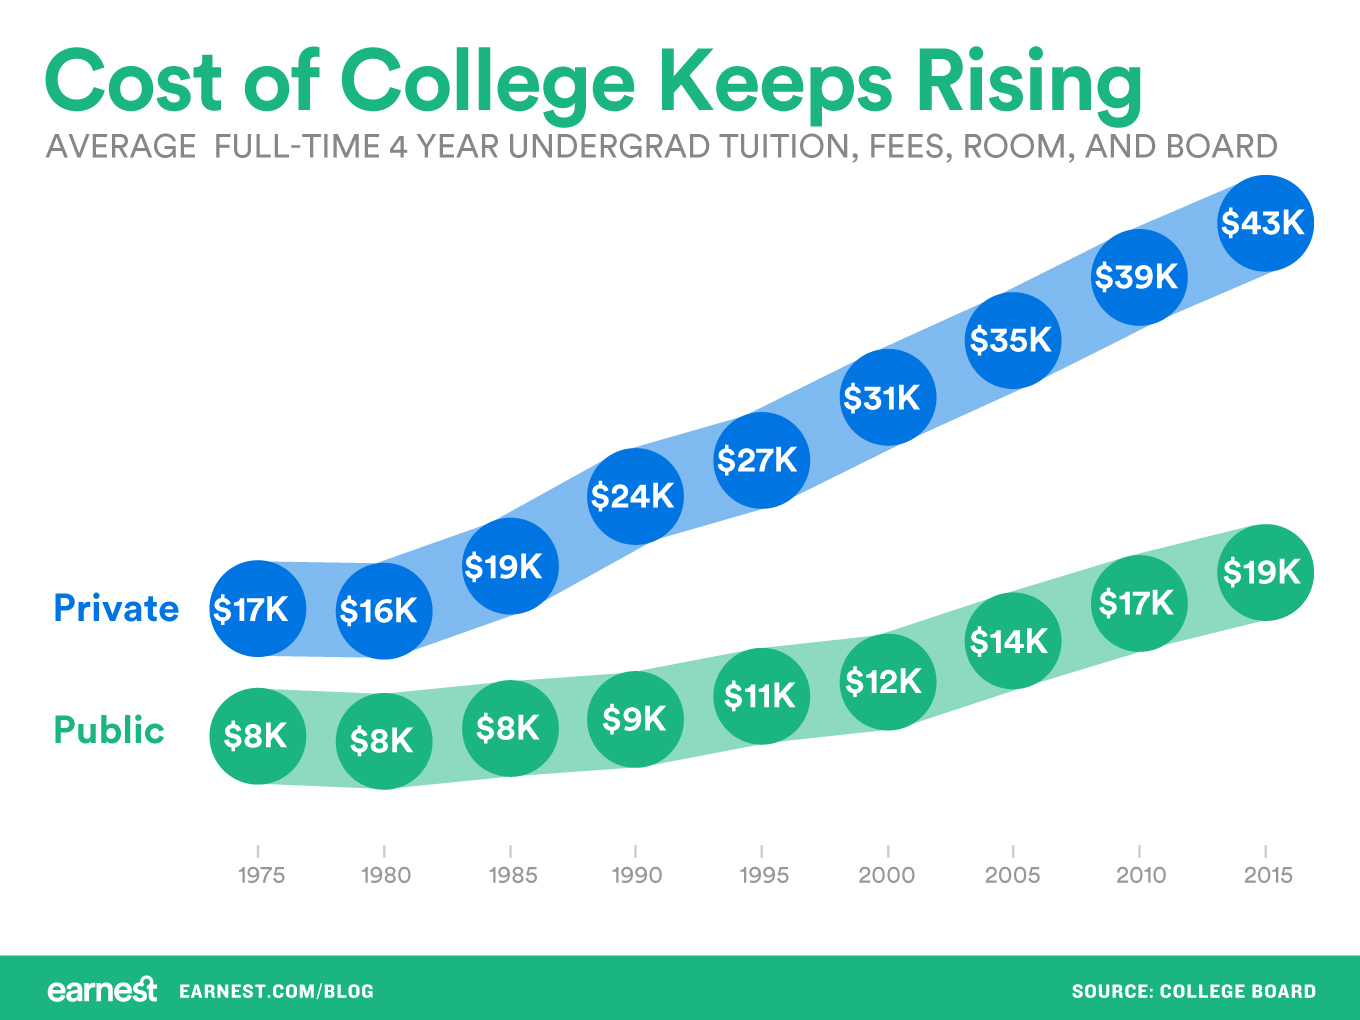 Why Are American Universities Priced Higher Than Ever Before?